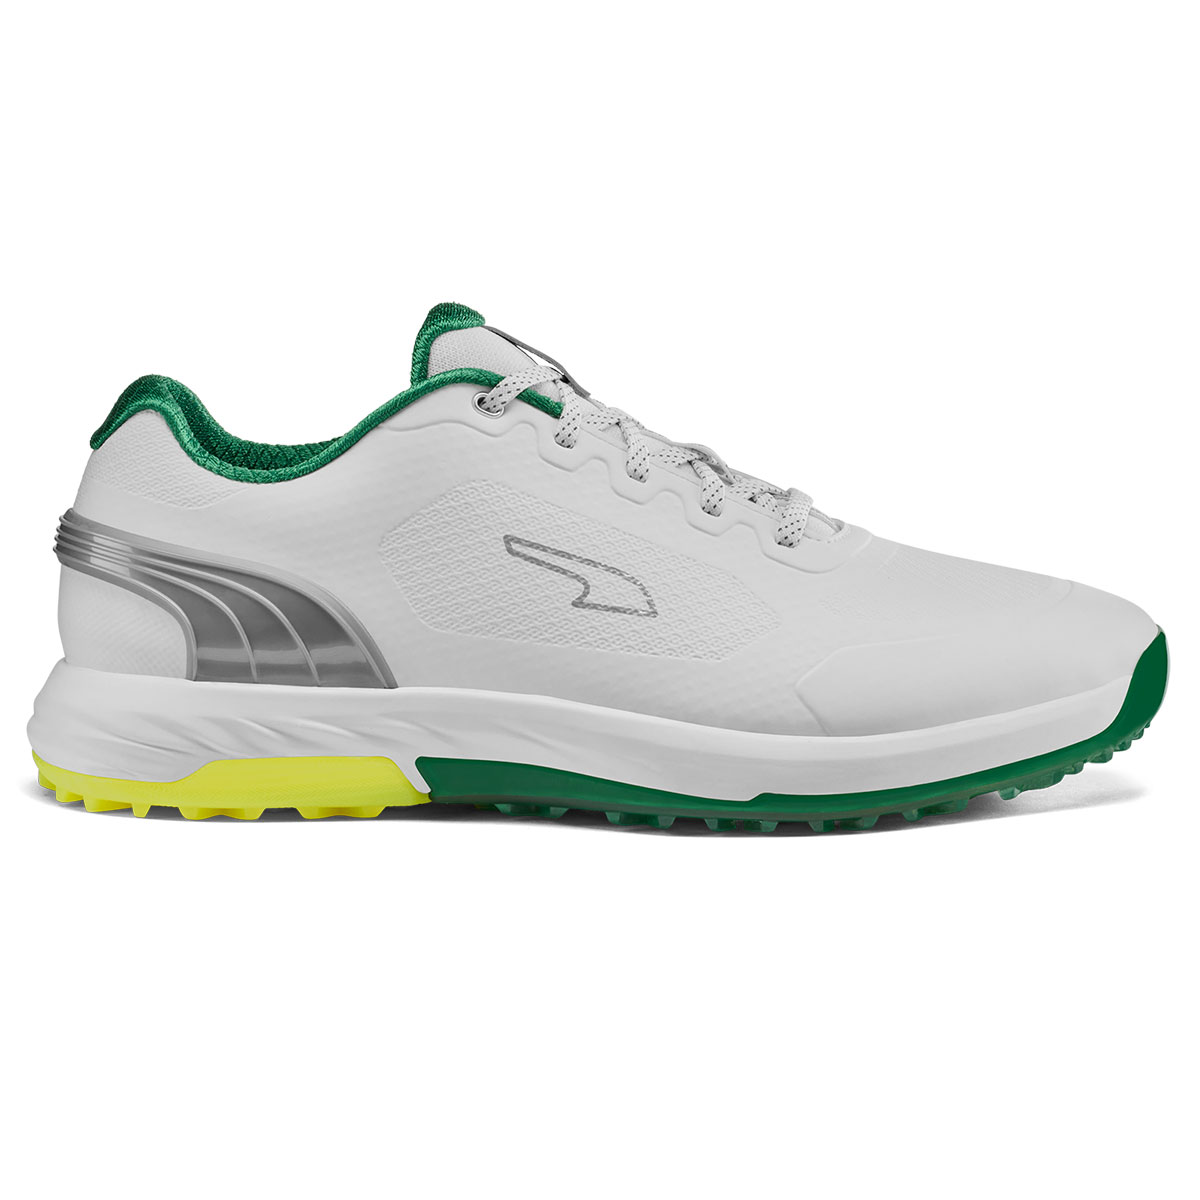 Omhyggelig læsning tirsdag shabby PUMA Men's ALPHACAT NITRO Waterproof Spikeless Golf Shoes from american golf